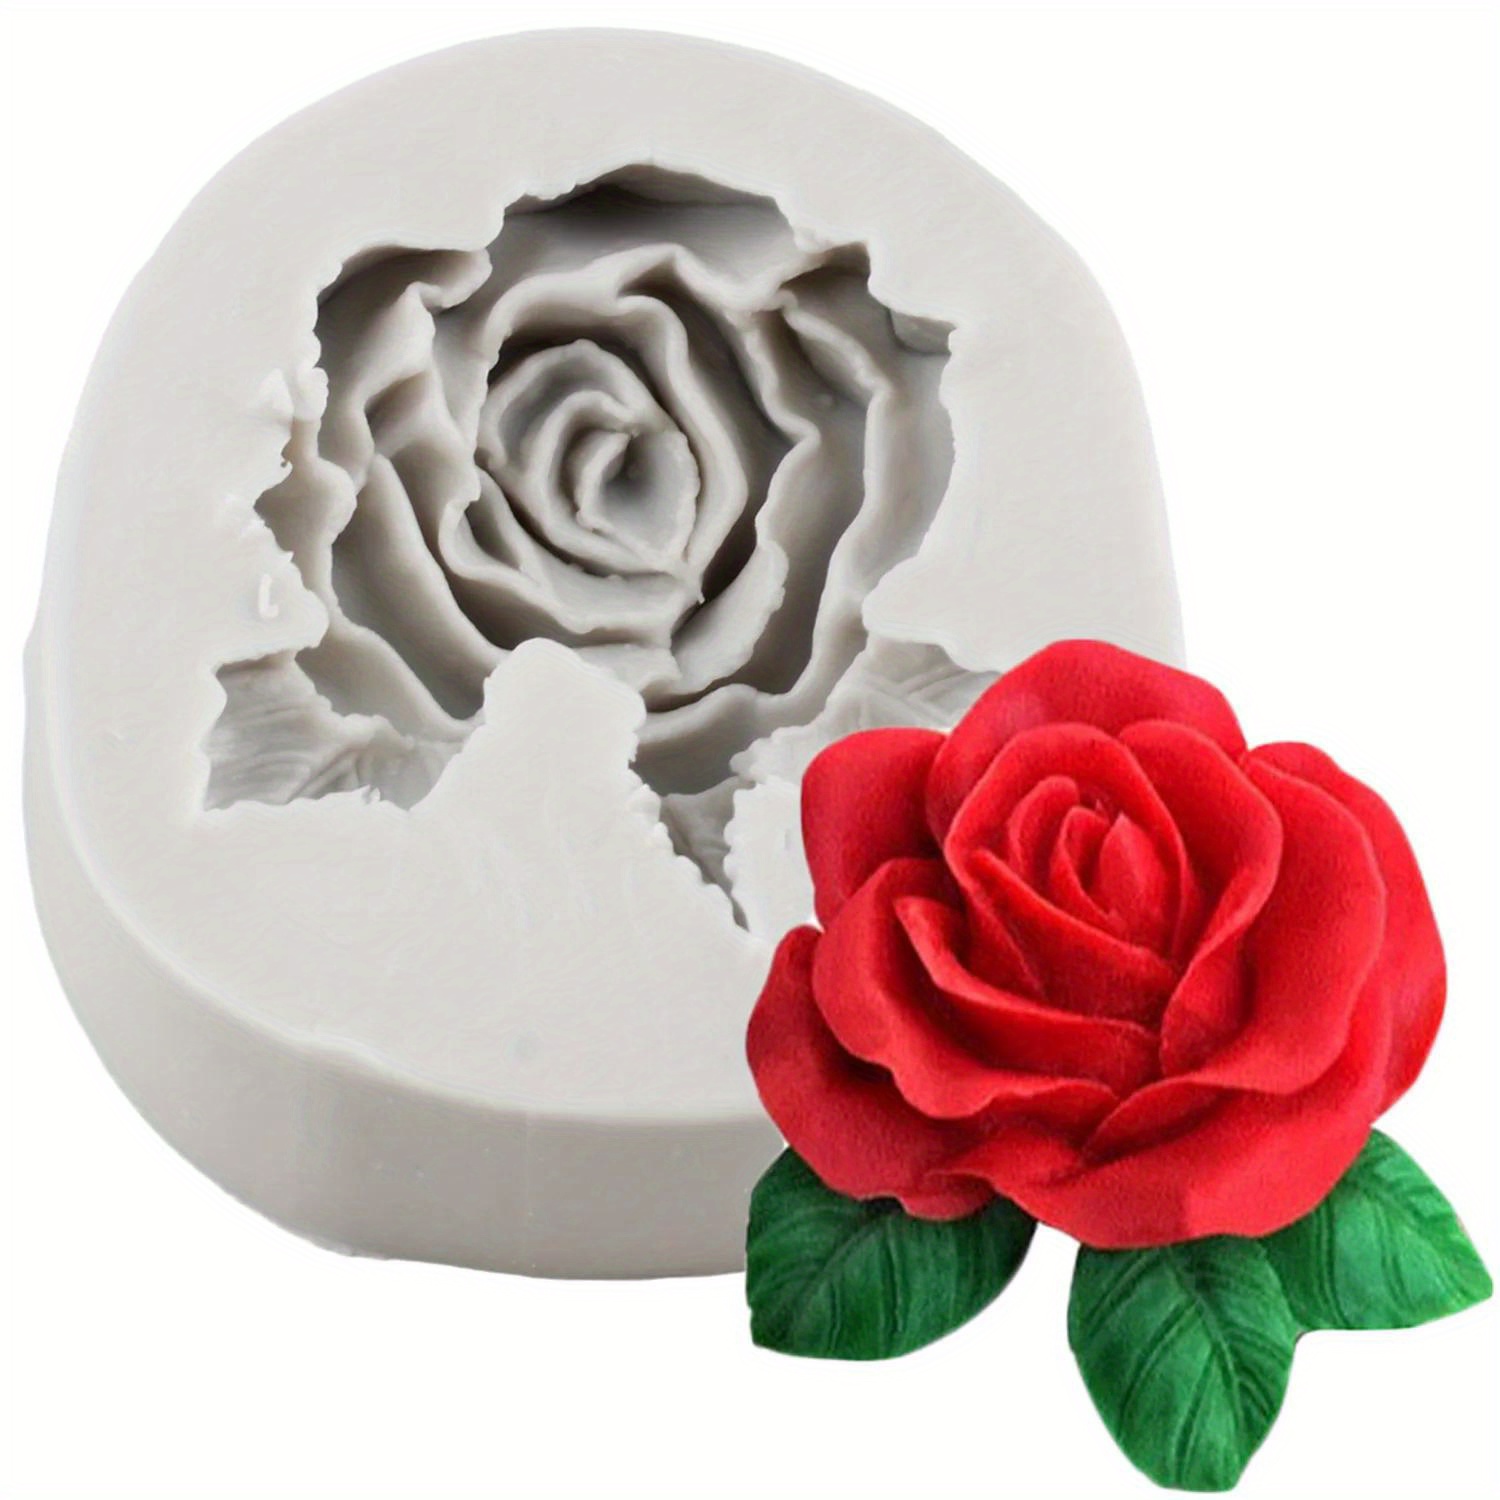 Rose Flowers Silicone Mold Polymer Clay Crafts DIY Cake Border